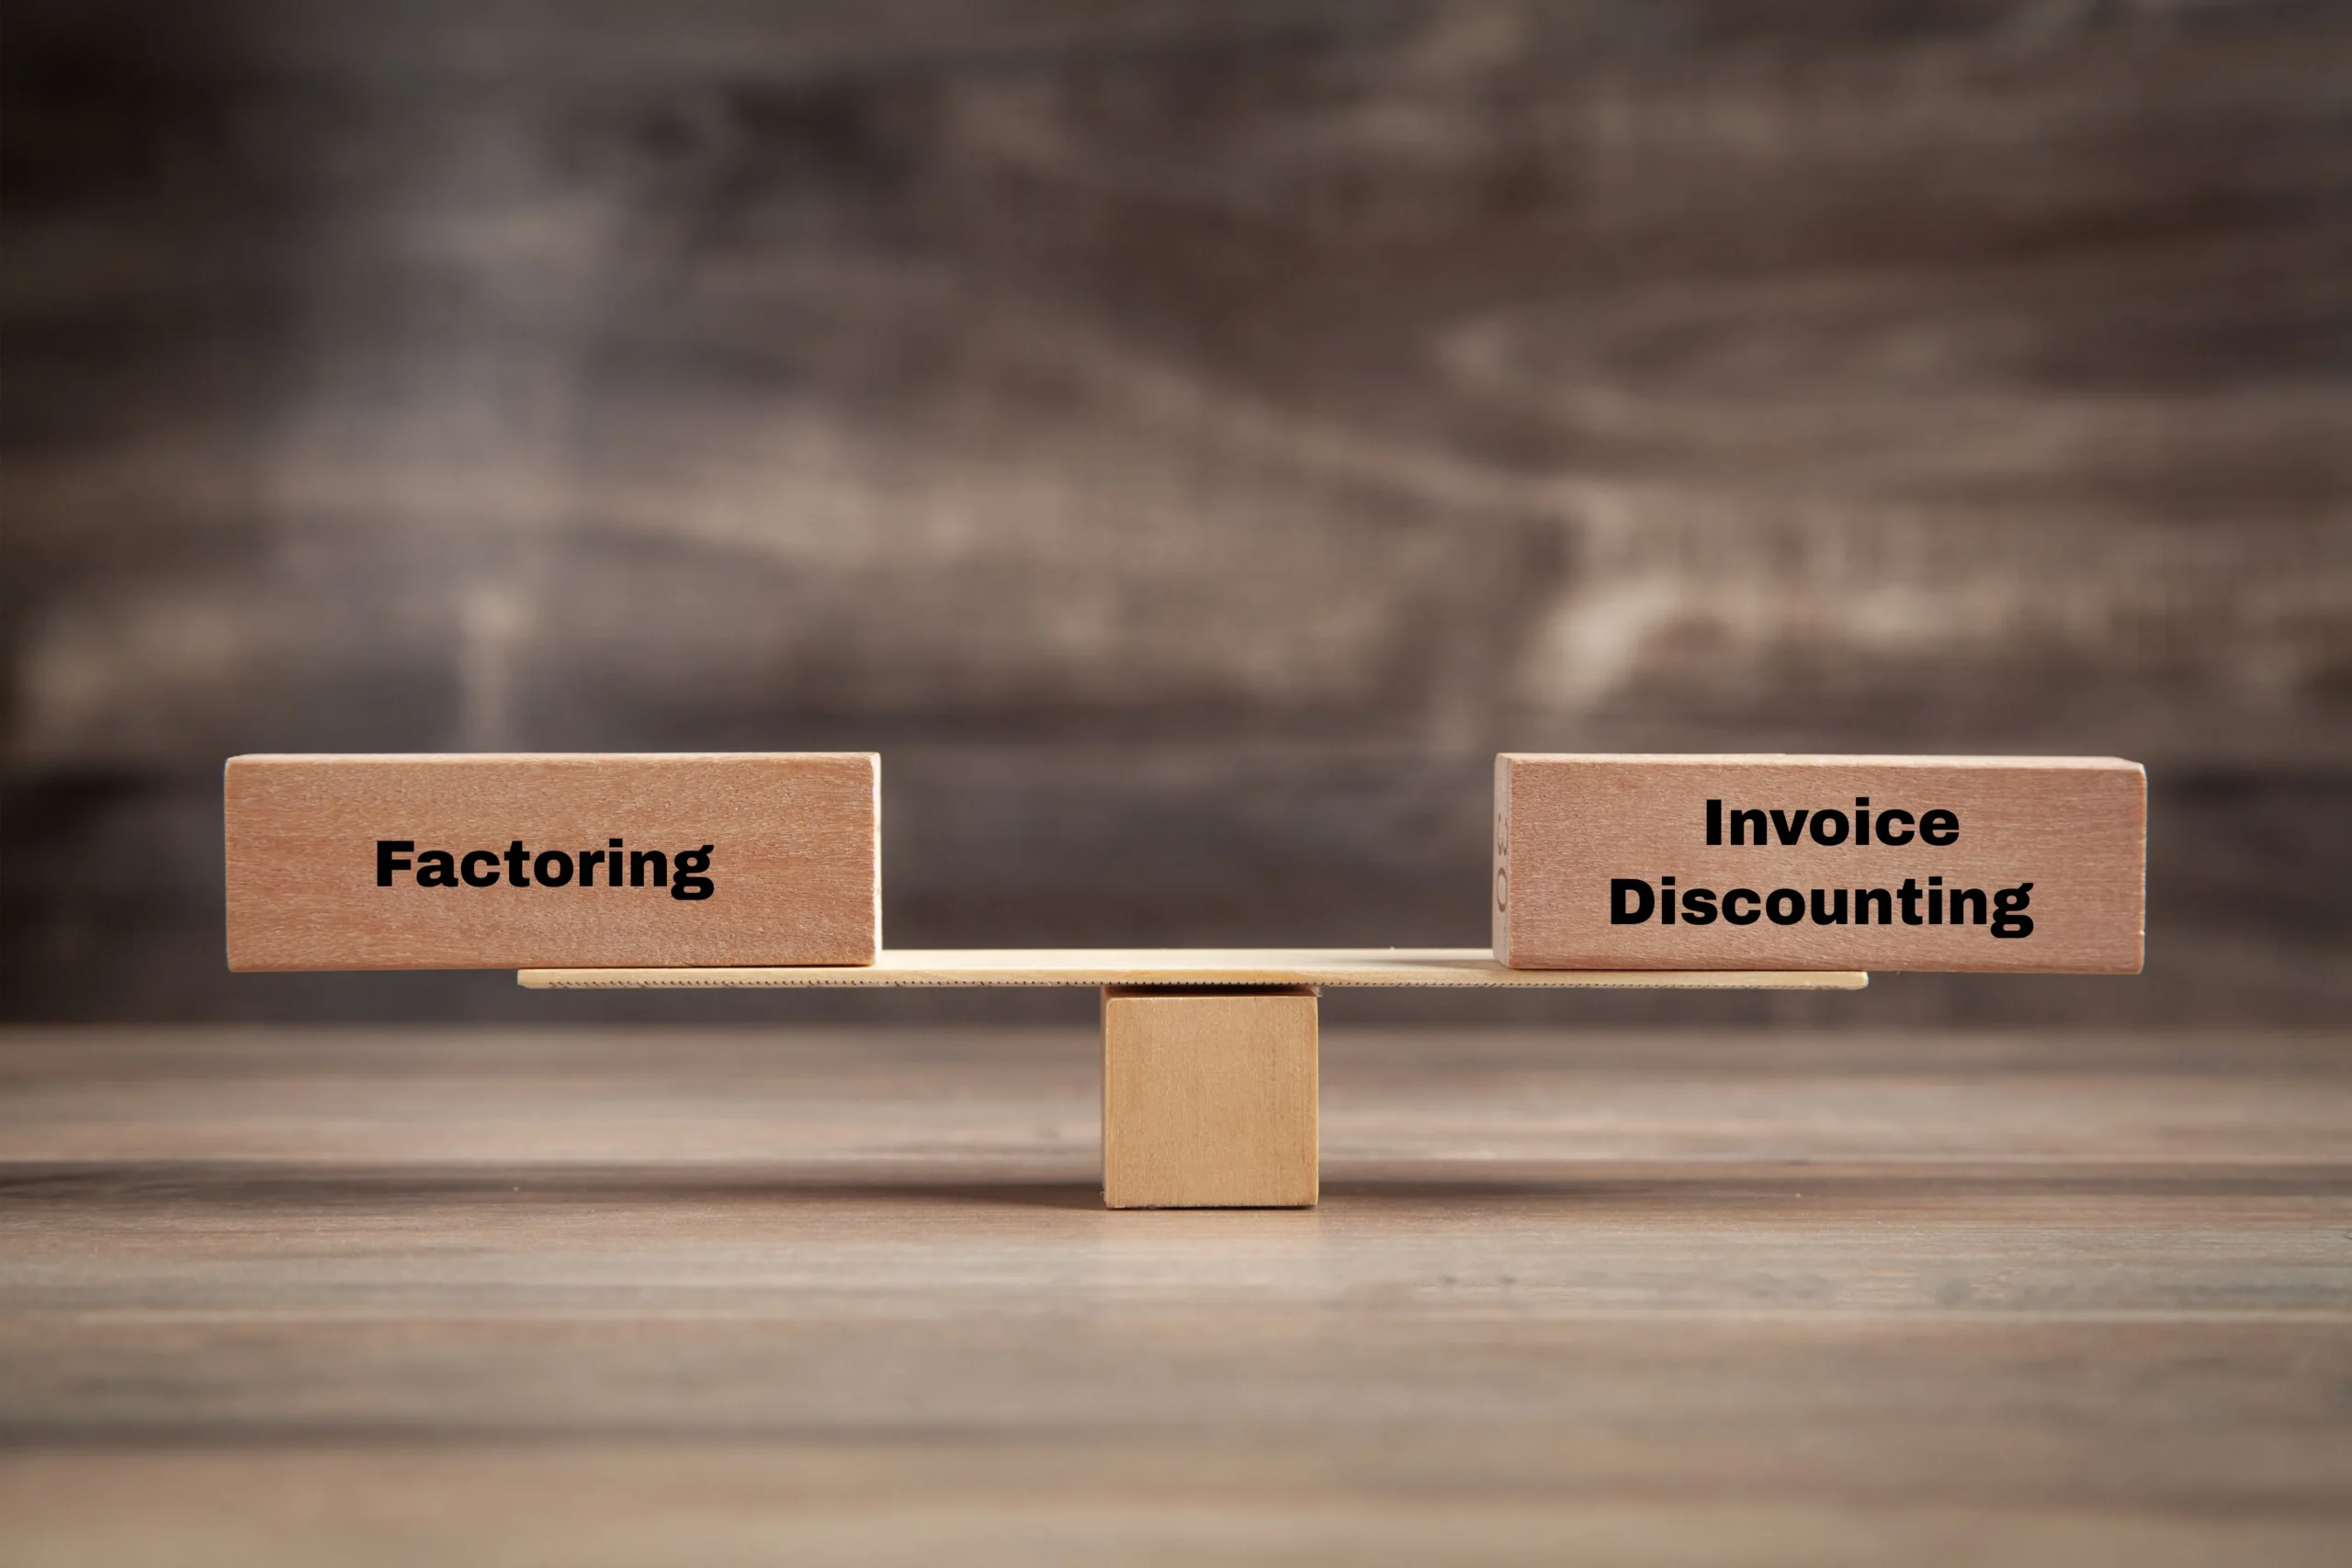 How Do Businesses Choose Between Factoring and Invoice Discounting